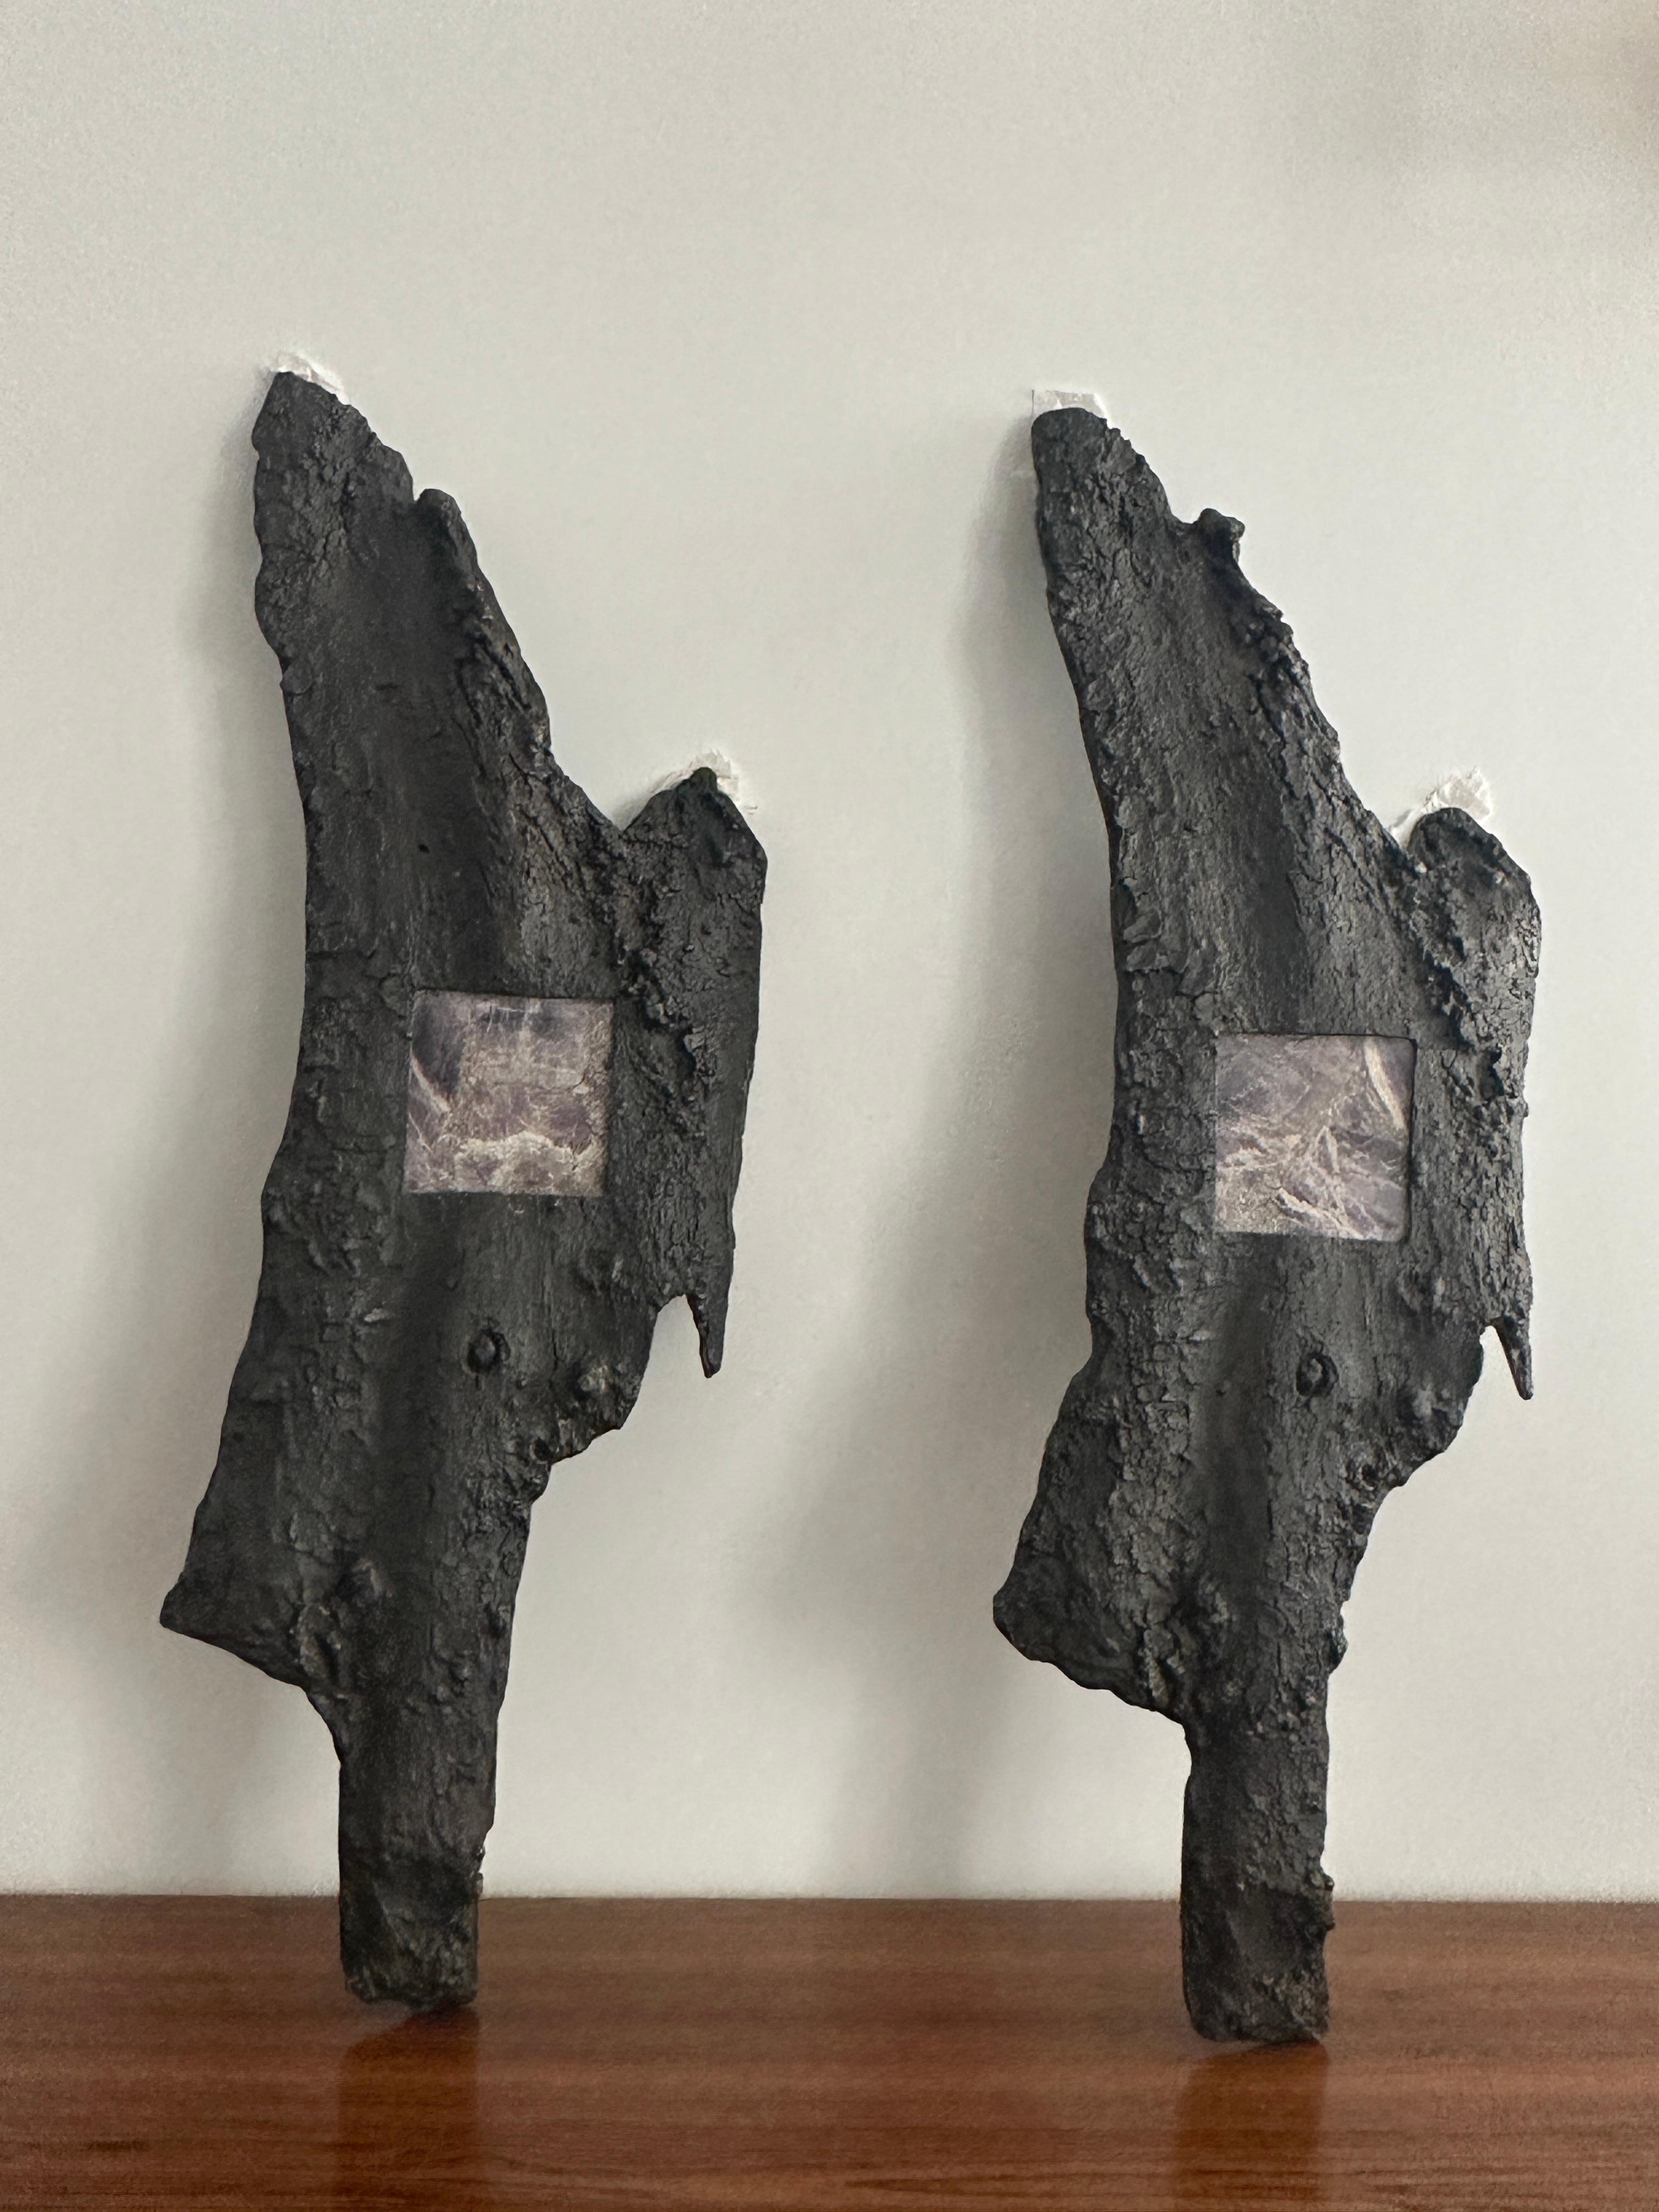 Anonymous wall light solid cast bronze and semi precious Amethyst stone, France, 1980
A pair of sconces in cast bronze in the shape of a tree bark, with an insertion of semi-precious stone that lets the light shine through
In the style of Marc du